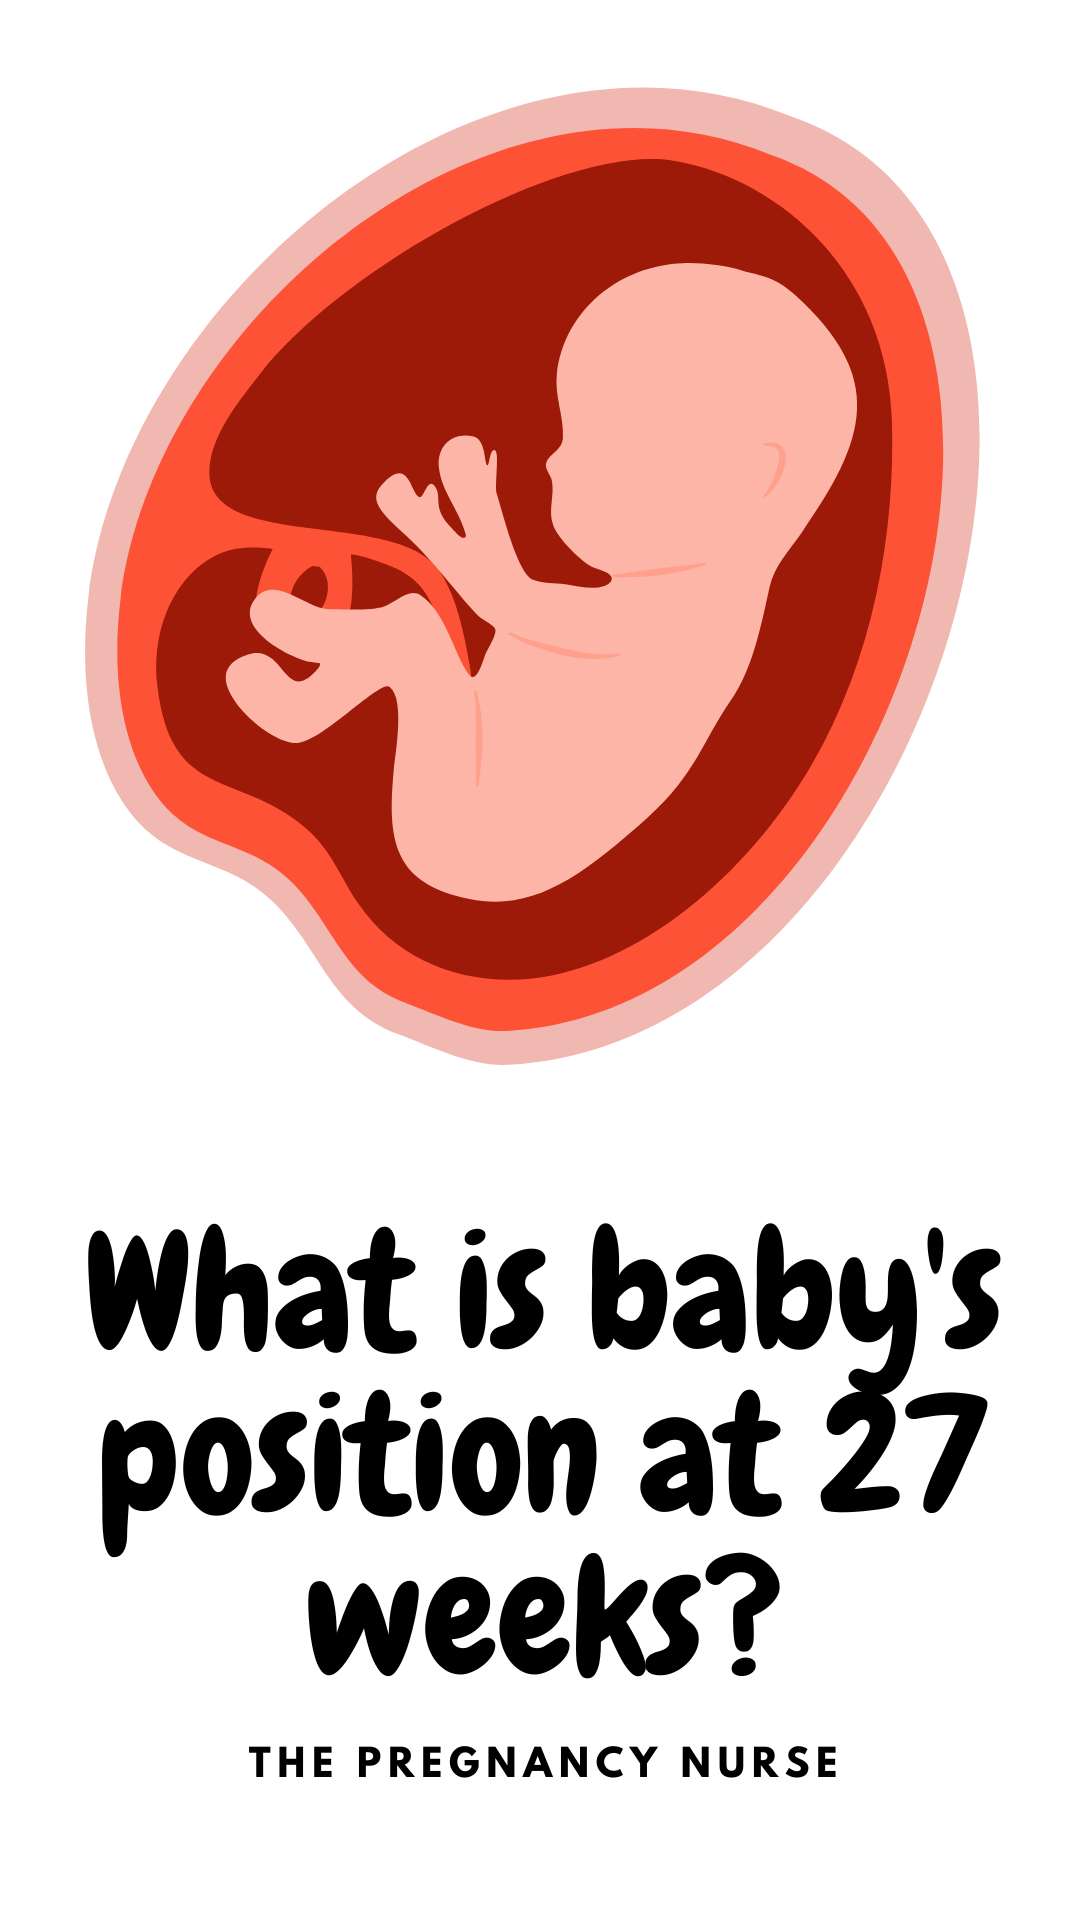 As your baby grows during your 27th week of pregnancy, they will start to move more and more. They tend to settle into a particular position that they stay in until birth. This can be head down, breech, or transverse. Knowing your baby’s position can help you and your doctor plan for delivery and make sure that your baby is healthy and safe. Our experts can provide you with an ultrasound to determine your baby’s position and monitor any changes.